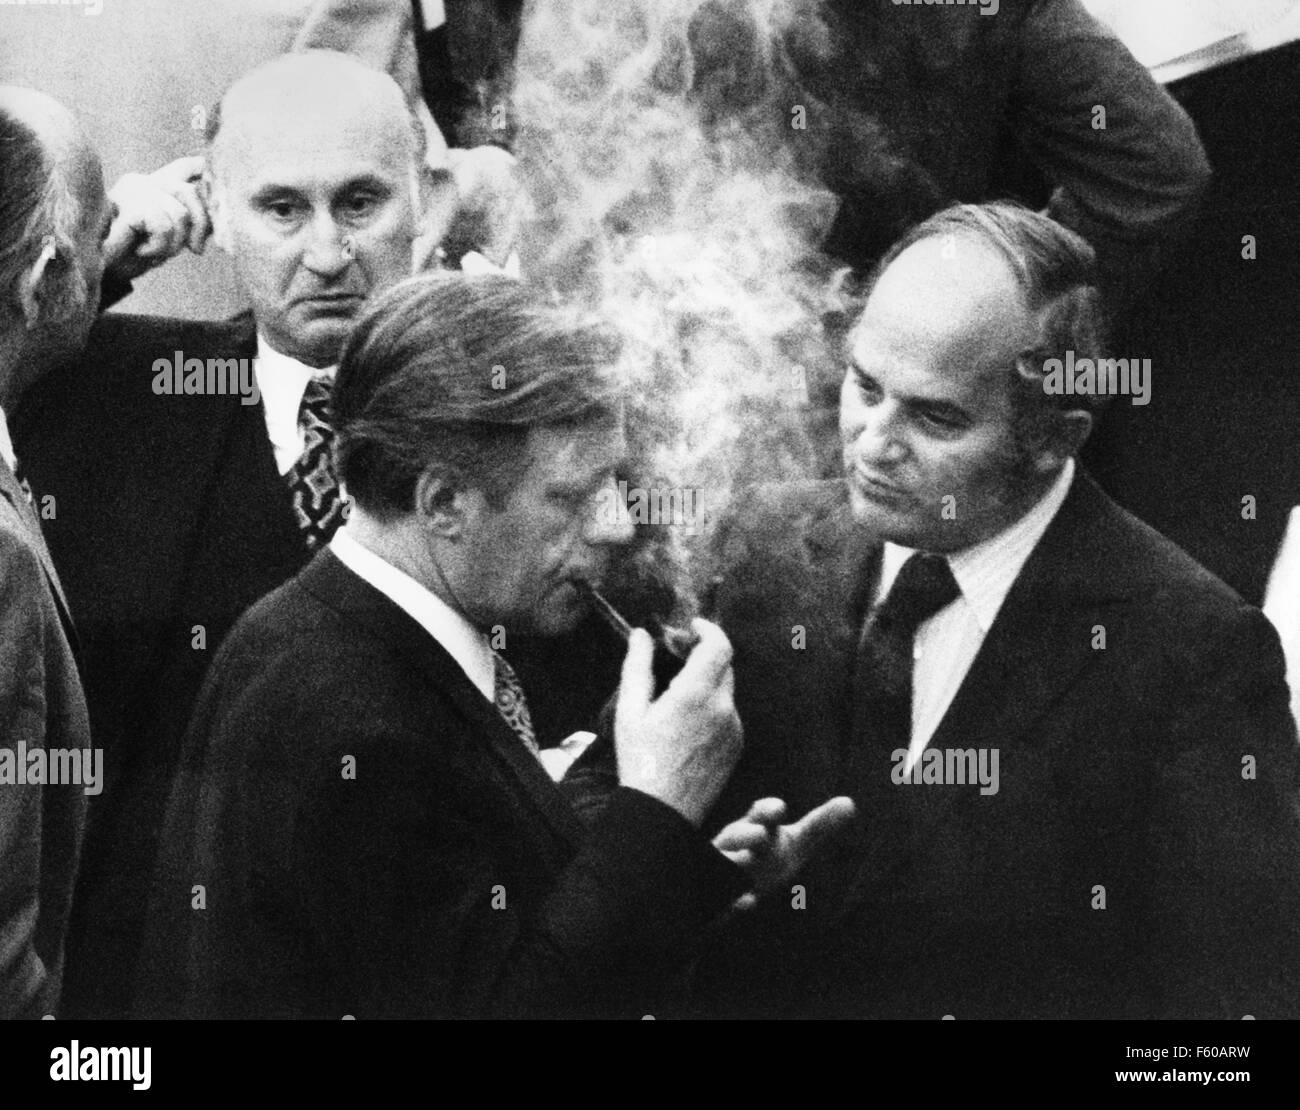 Defense Minister Helmut Schmidt (L) in a conversation with opposition leader Rainer Barzel (R) in the plenum of the German Bundestag in Bonn. The planned debate on the 'Ostverträge' was adjourned on 10 May 1972 for one week due to interfractional agreements. Stock Photo